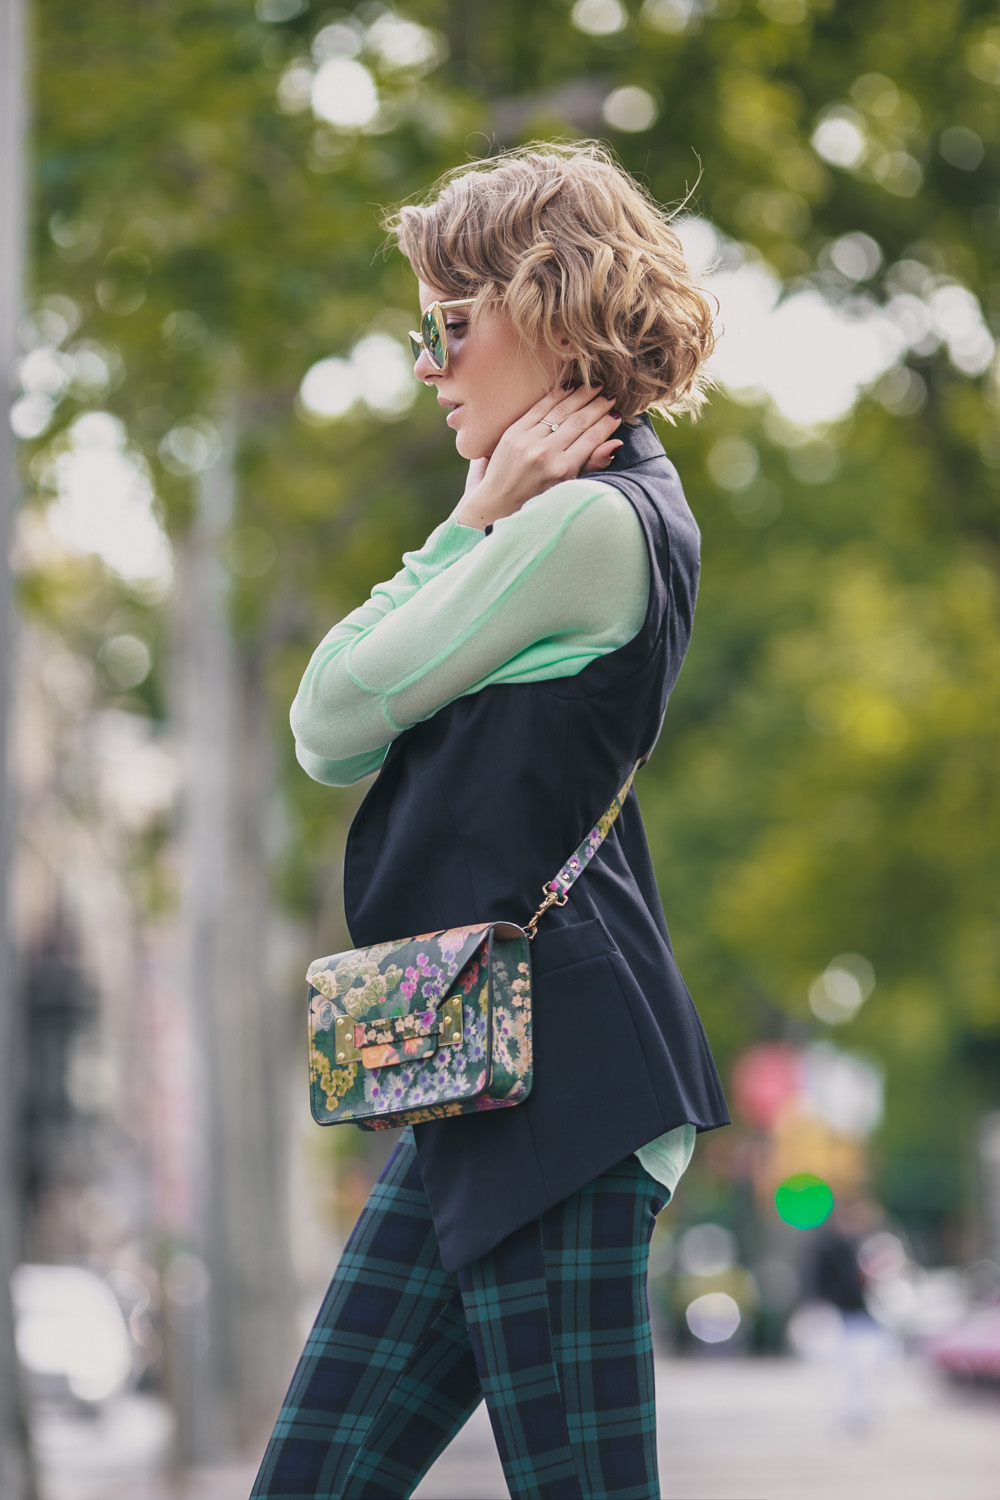 darya kamalova fashion blogger from thecablook in Barcelona wears sophie hulme flower bag with santa clara loafers and sheinside tartan green pants-3254